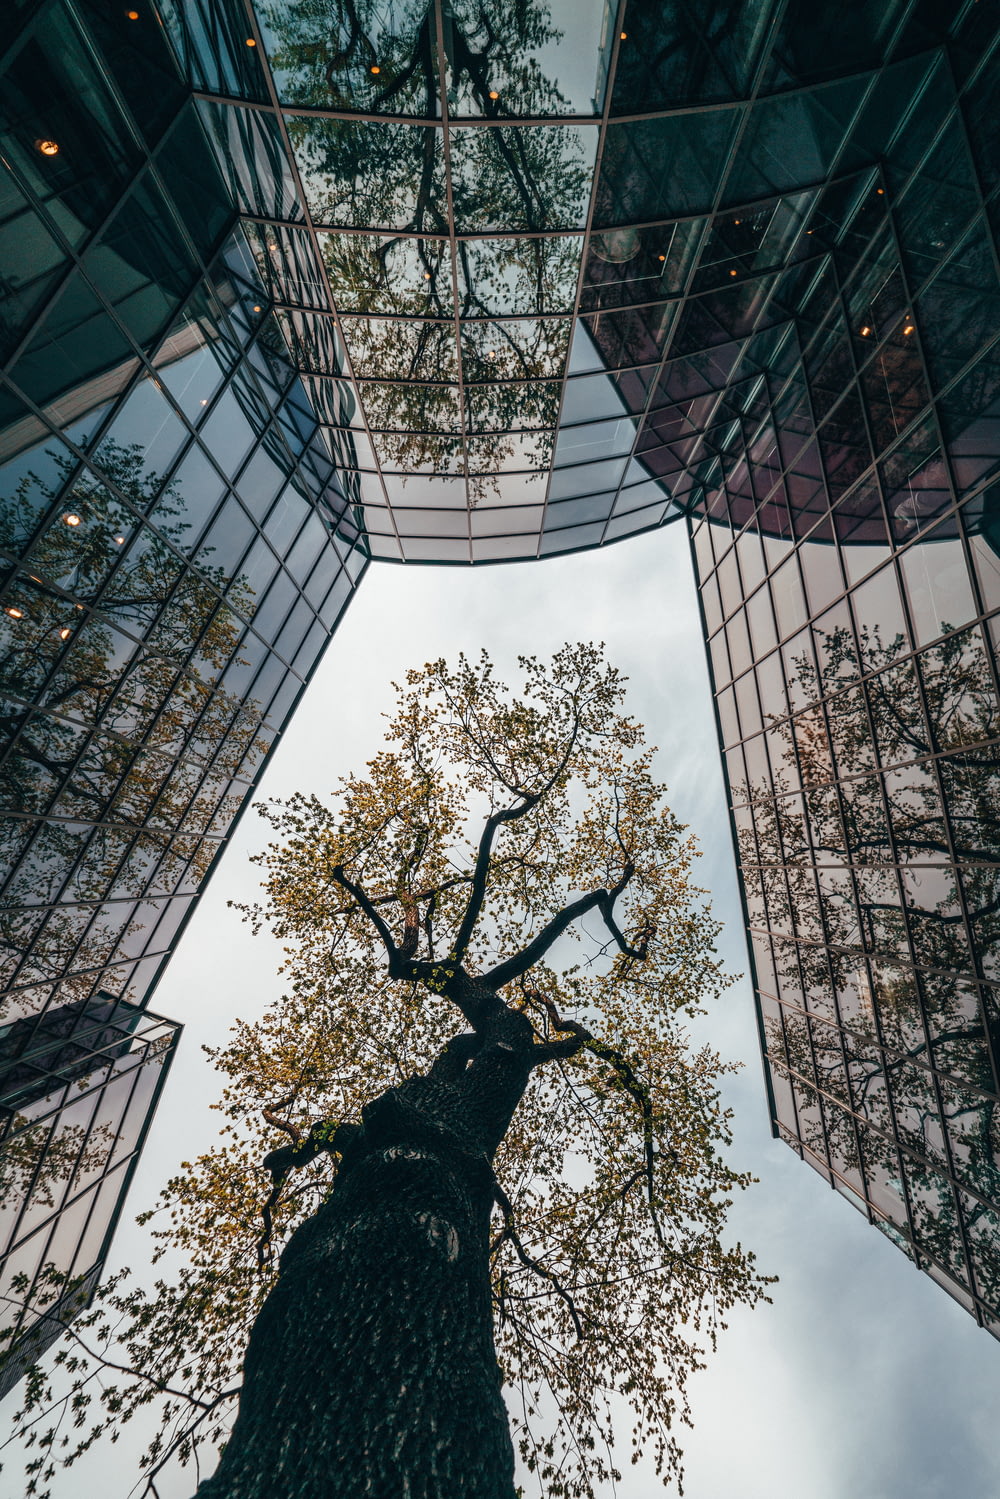 looking up at a tall tree in the middle of a city